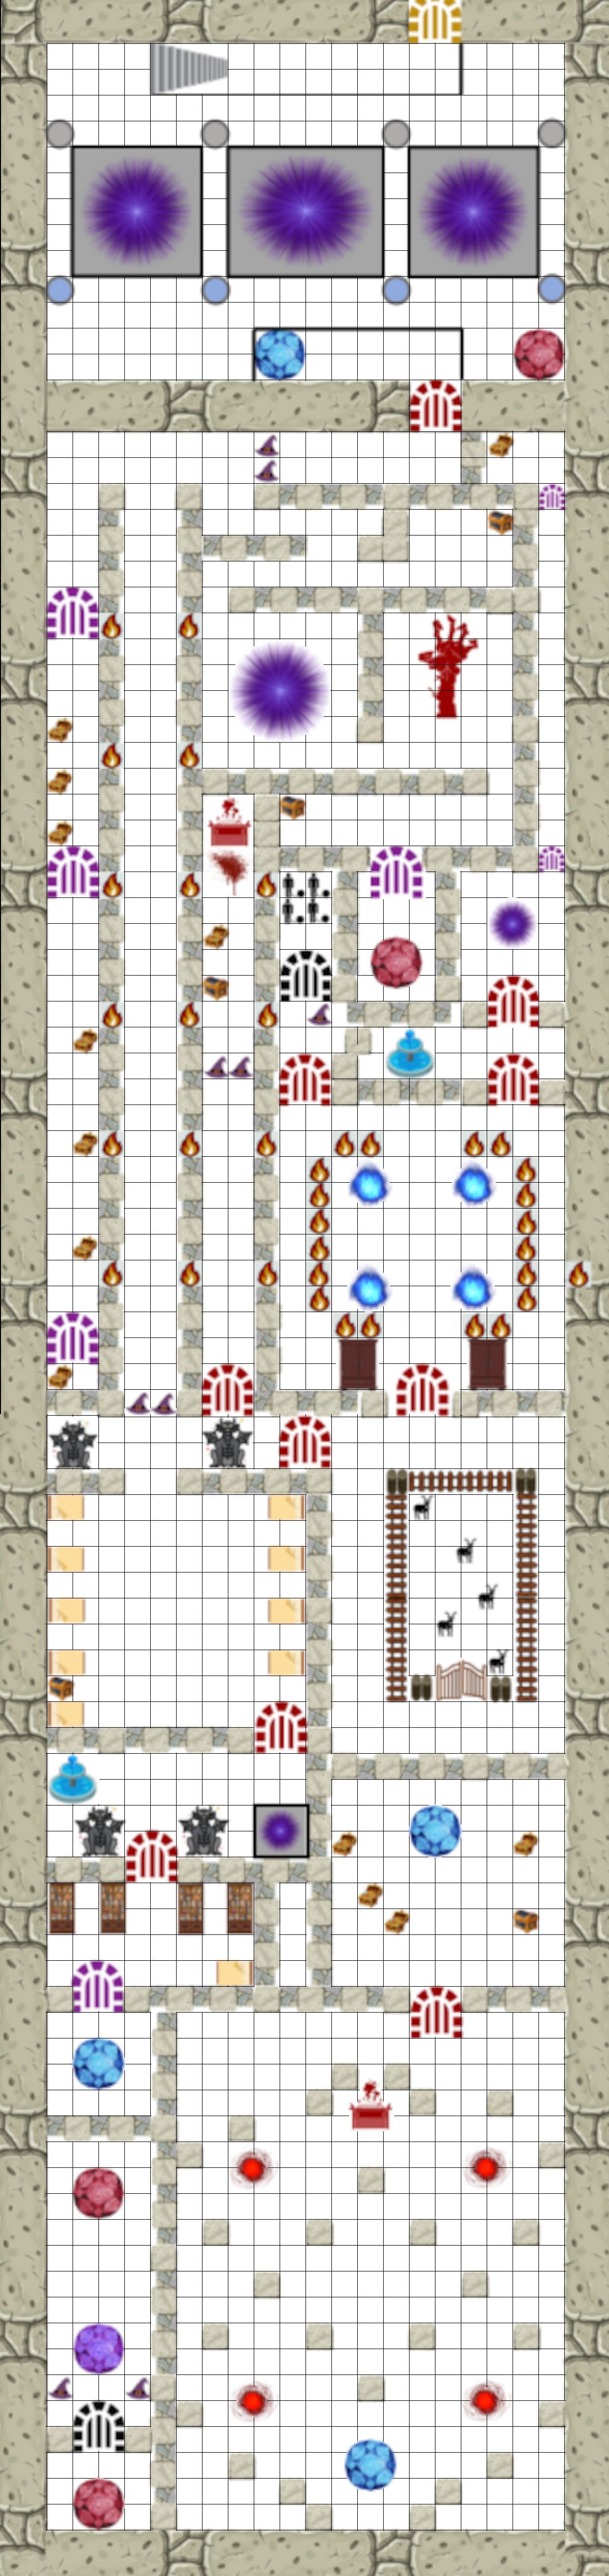 Crypt of the Plaguebringers